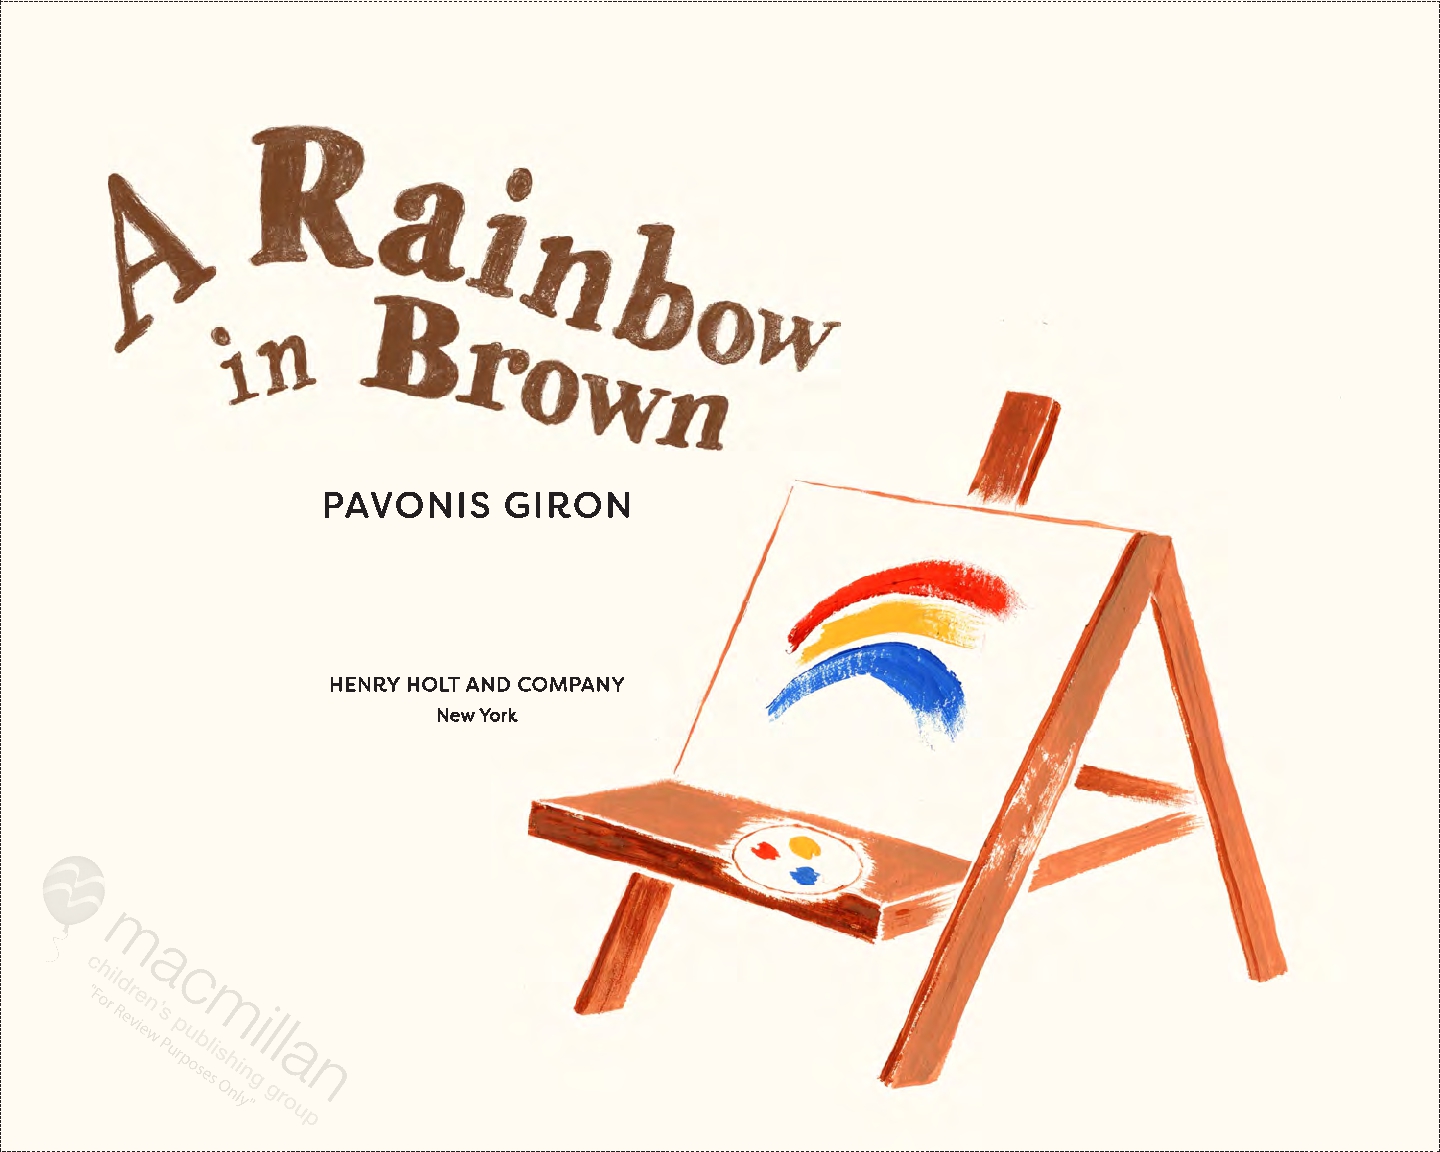 A Rainbow in Brown